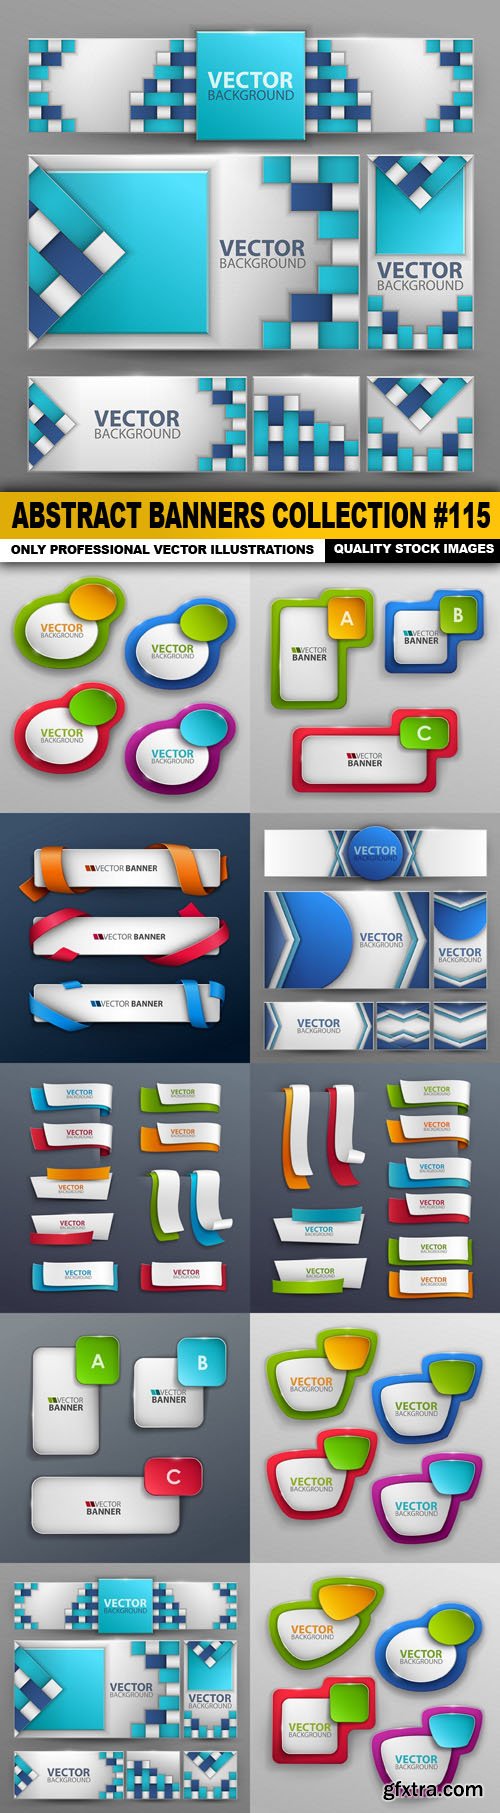 Abstract Banners Collection #115 - 10 Vectors